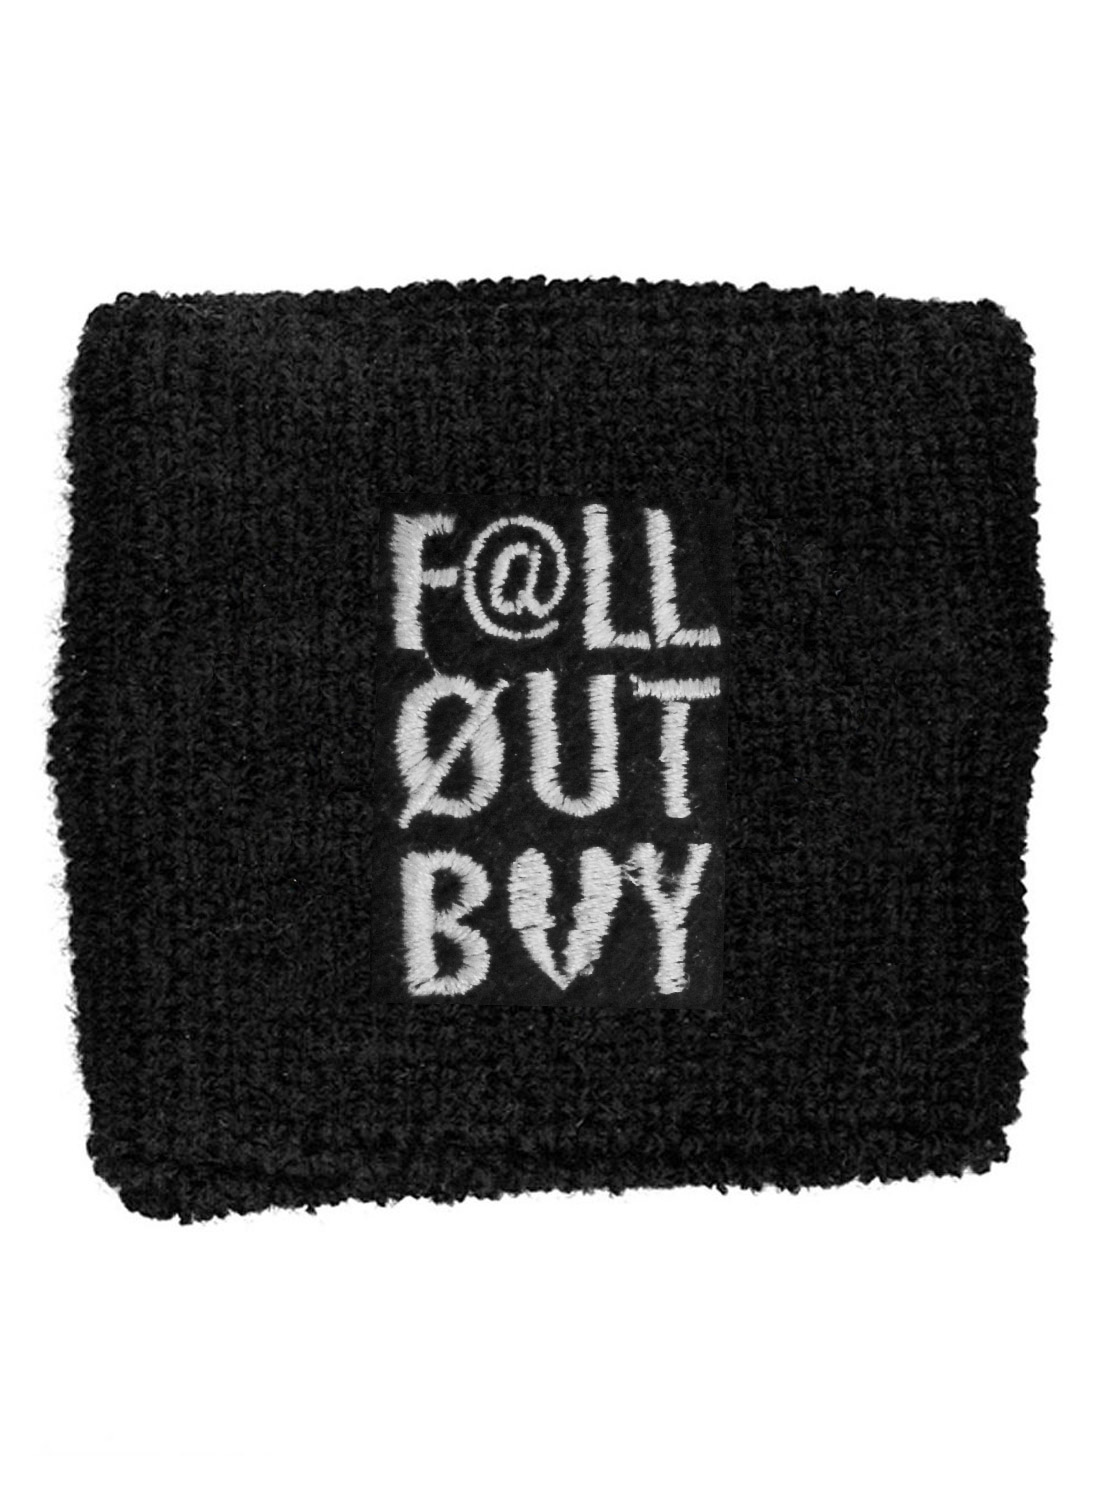 Fall Out Boy Embroidered Sweatband